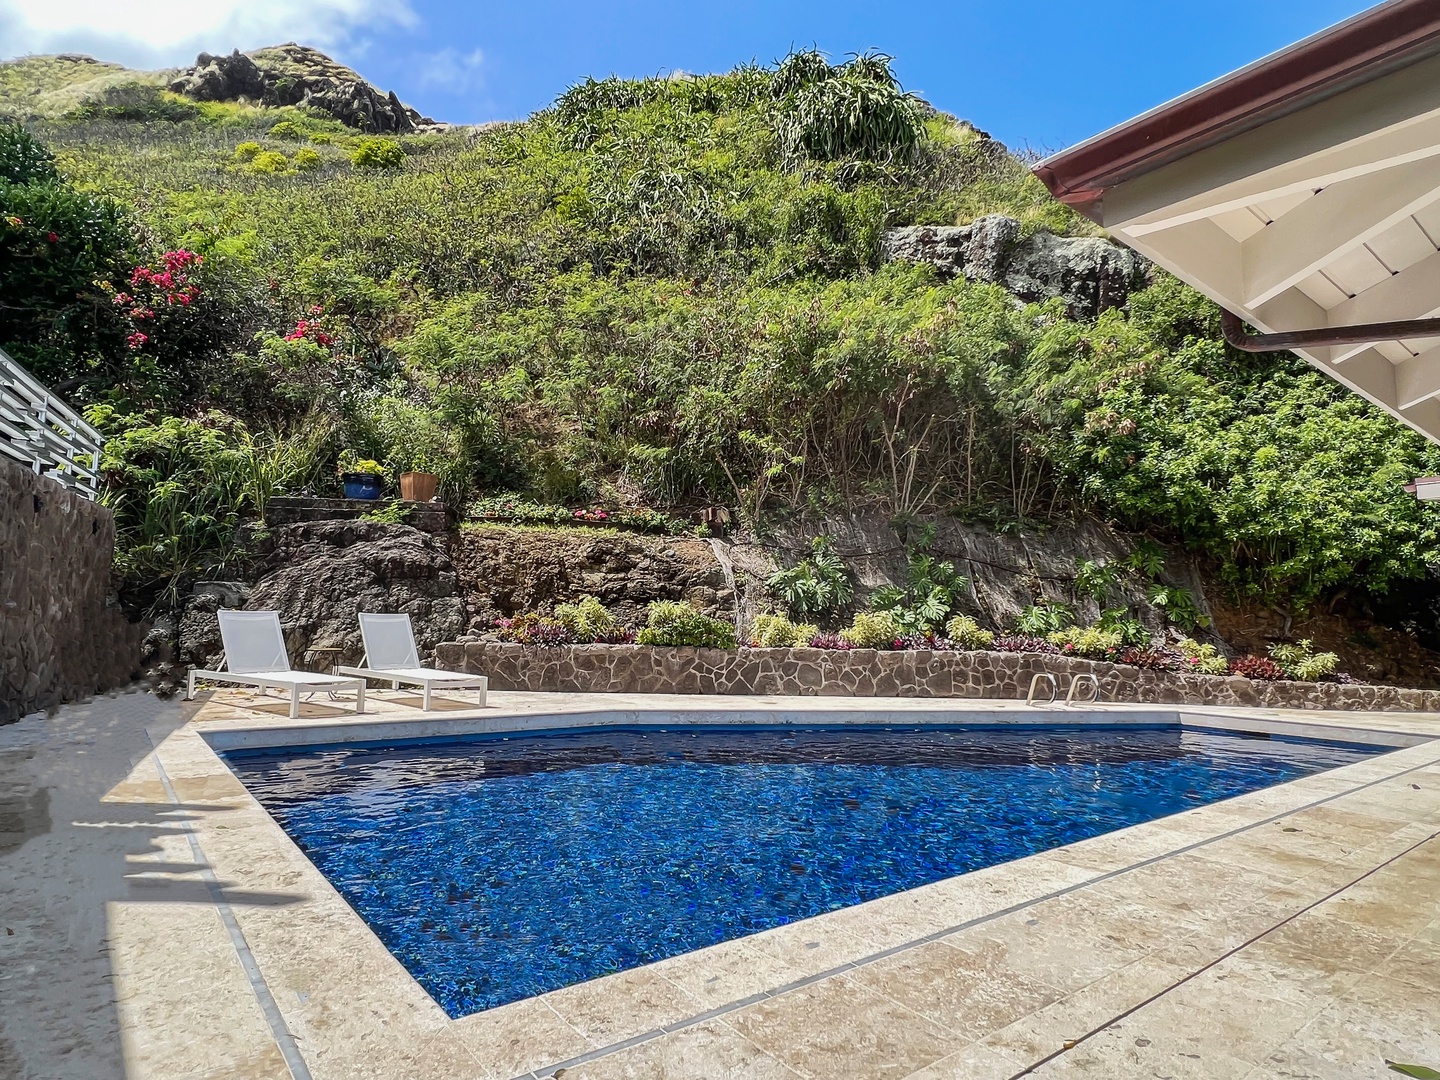 Kailua Vacation Rentals, Hale Lani - Private hillside heaven by the pool